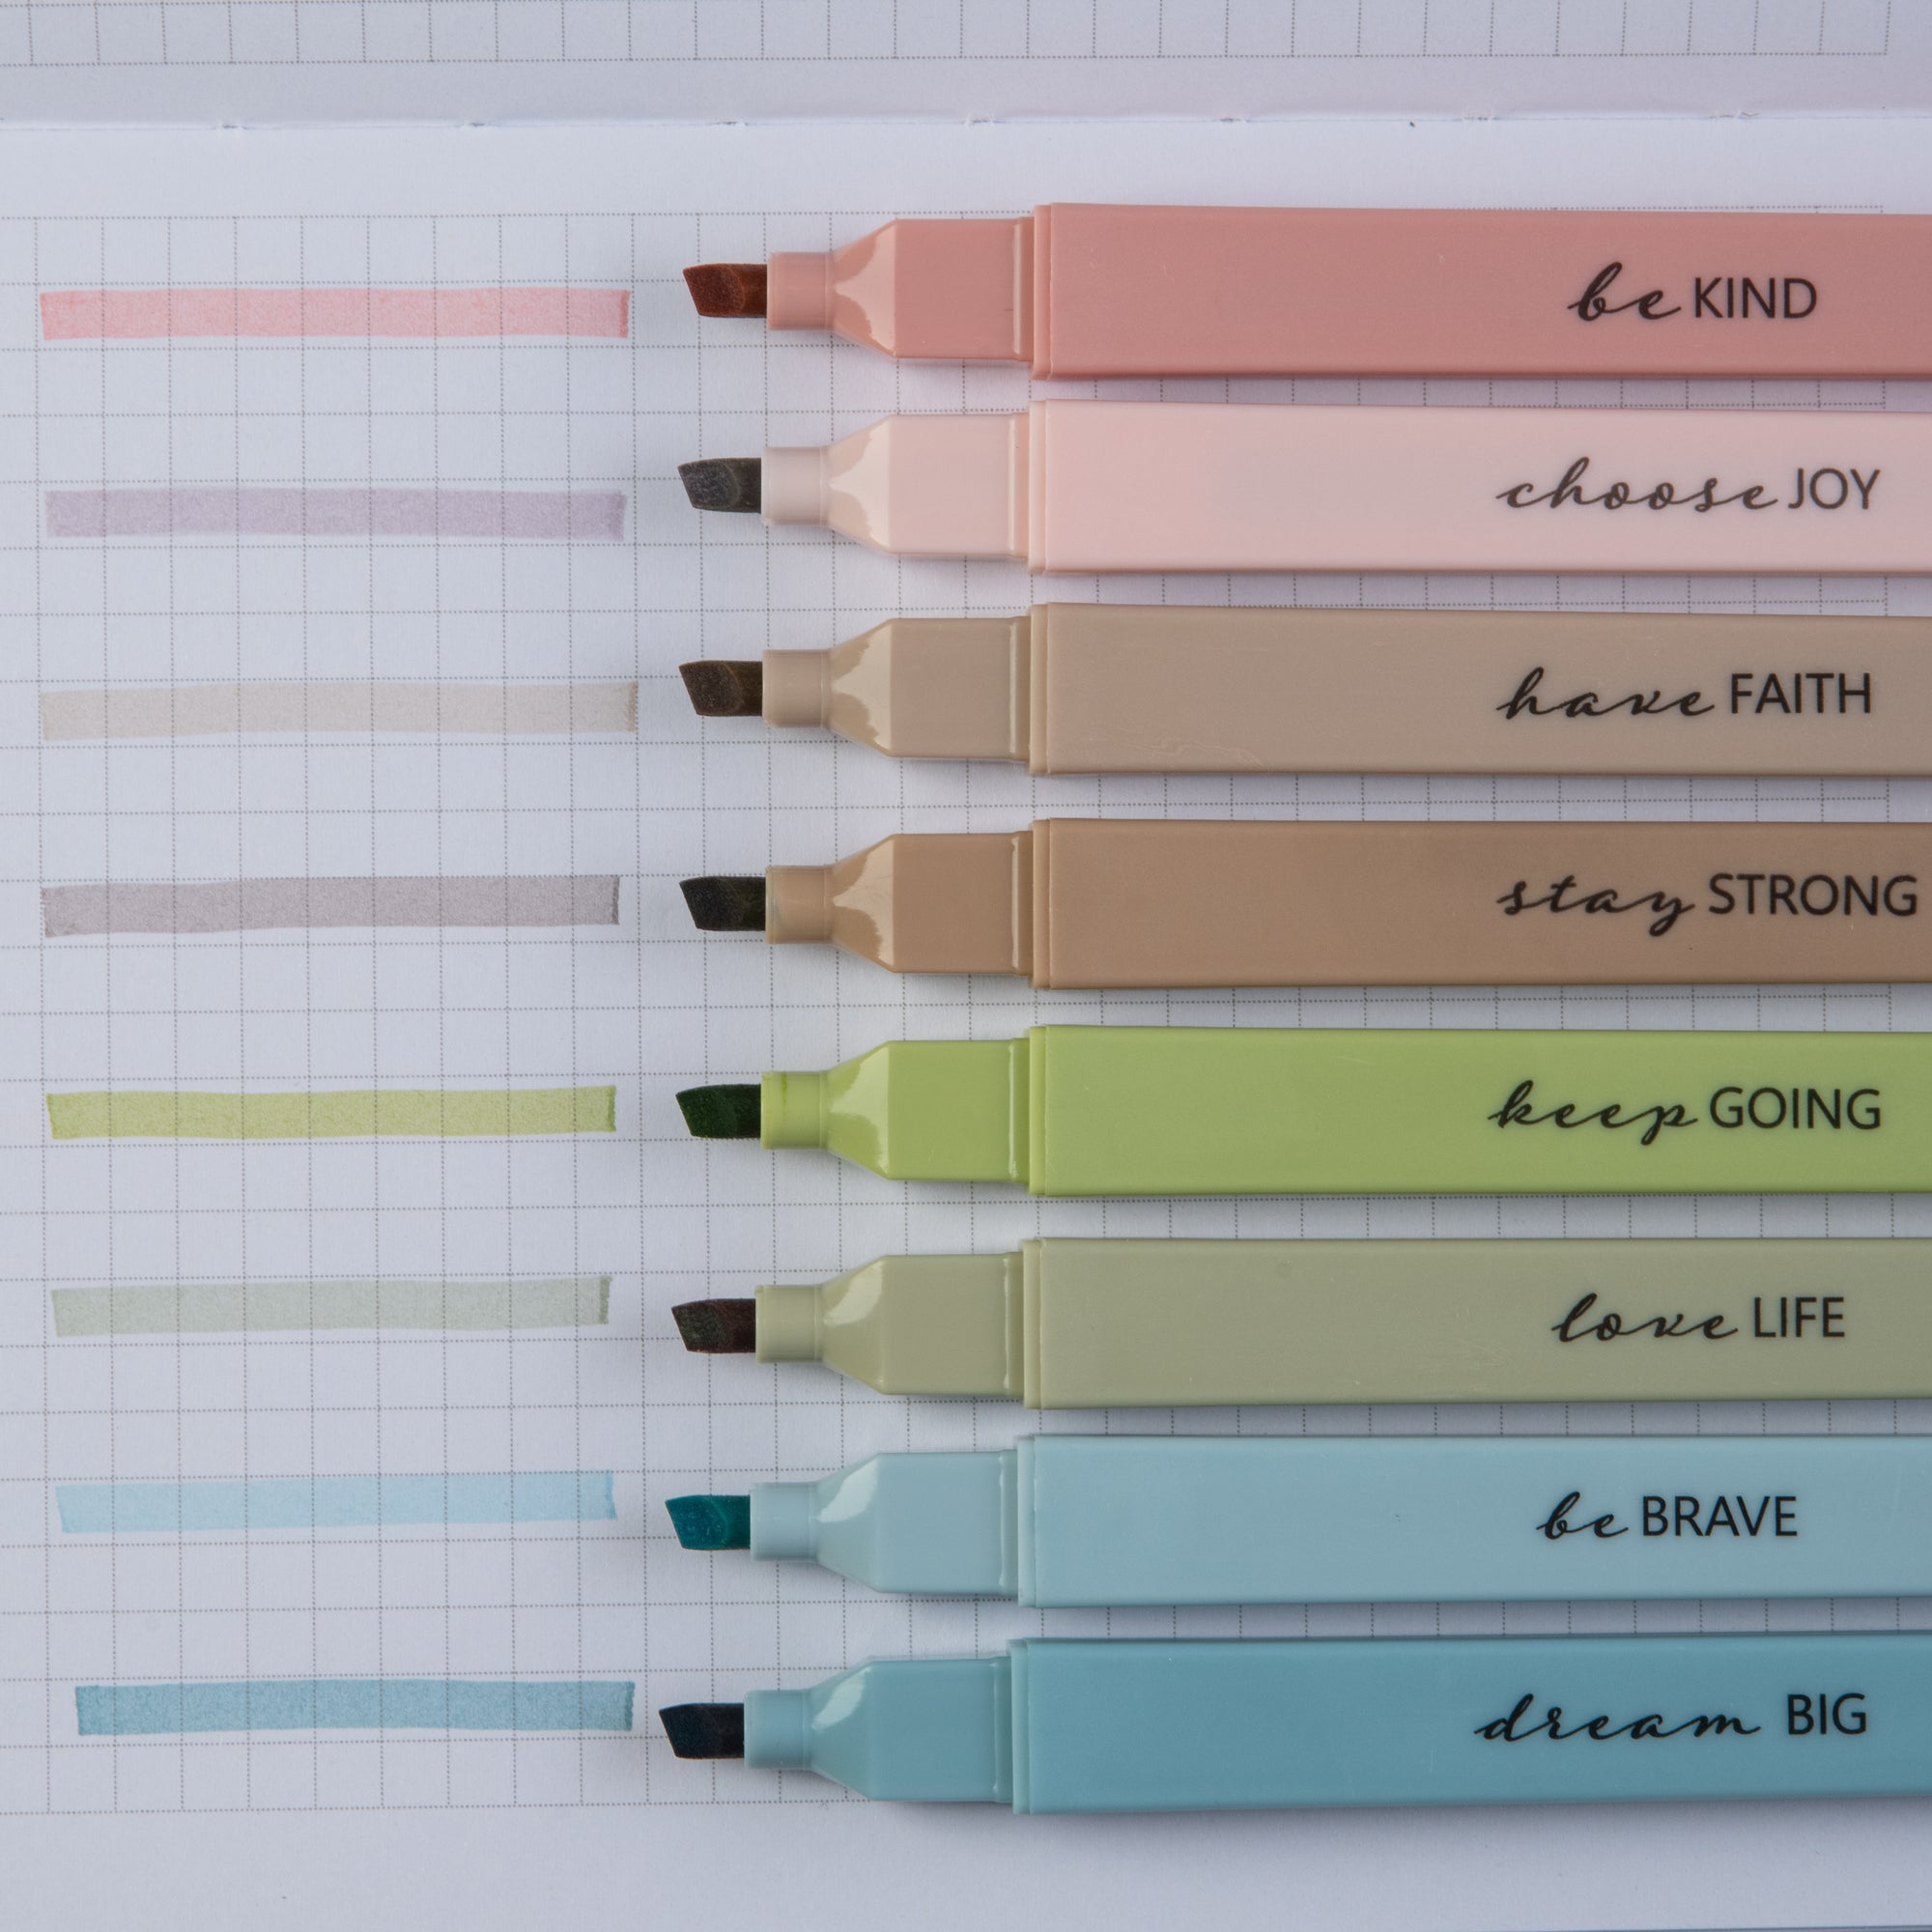 Blieve - Earthy Colored Gel Pens with Cool Matte Finish, Aesthetic and Cute Pens with Smooth Writing for Journaling and Bible Note Taking No Bleed